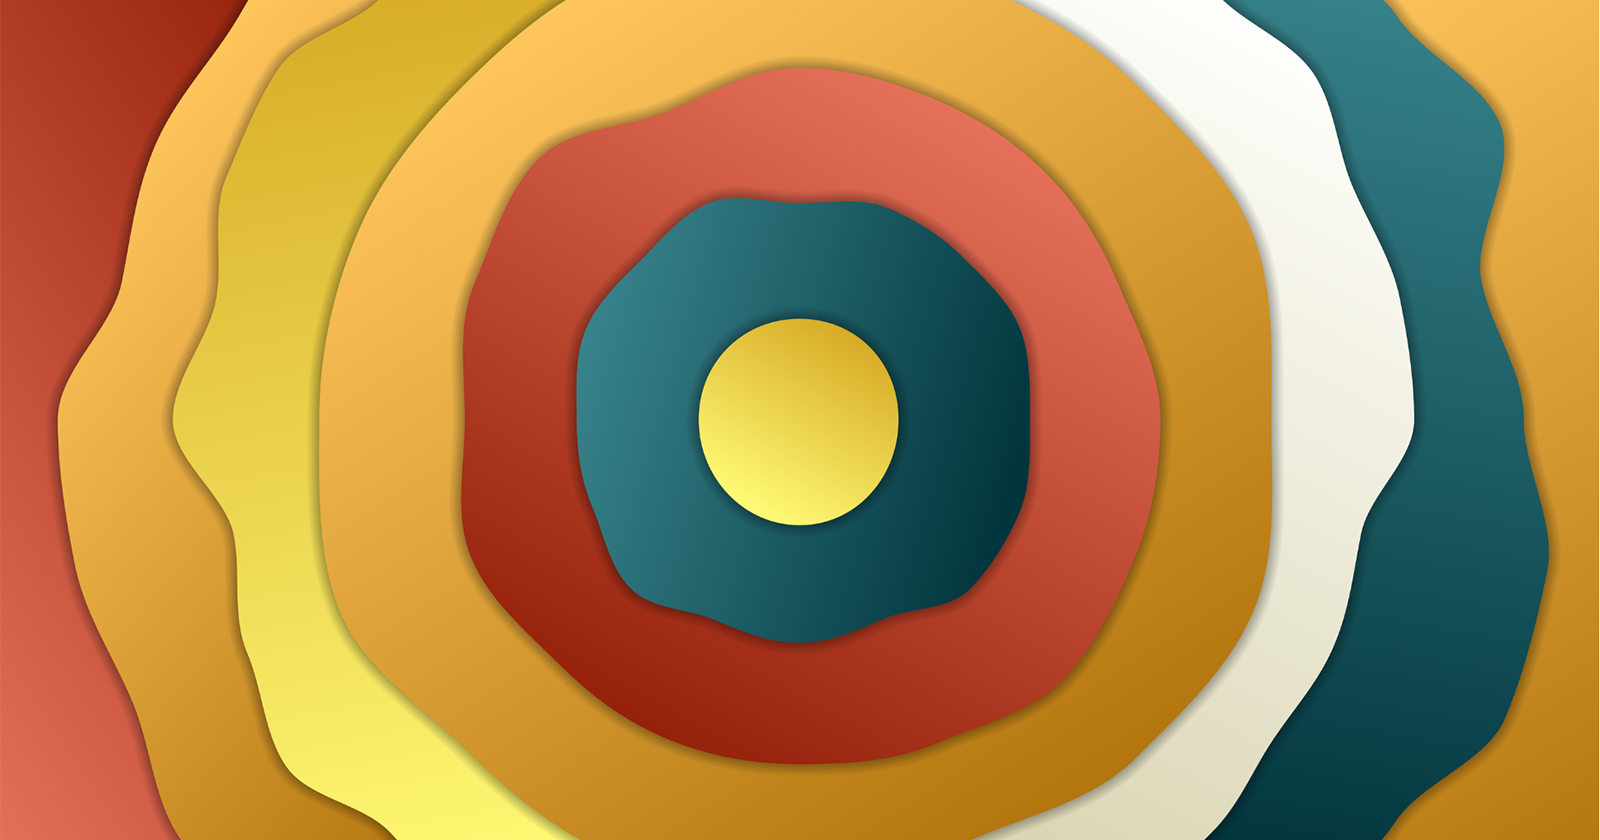 colorful graphic of concentric circles